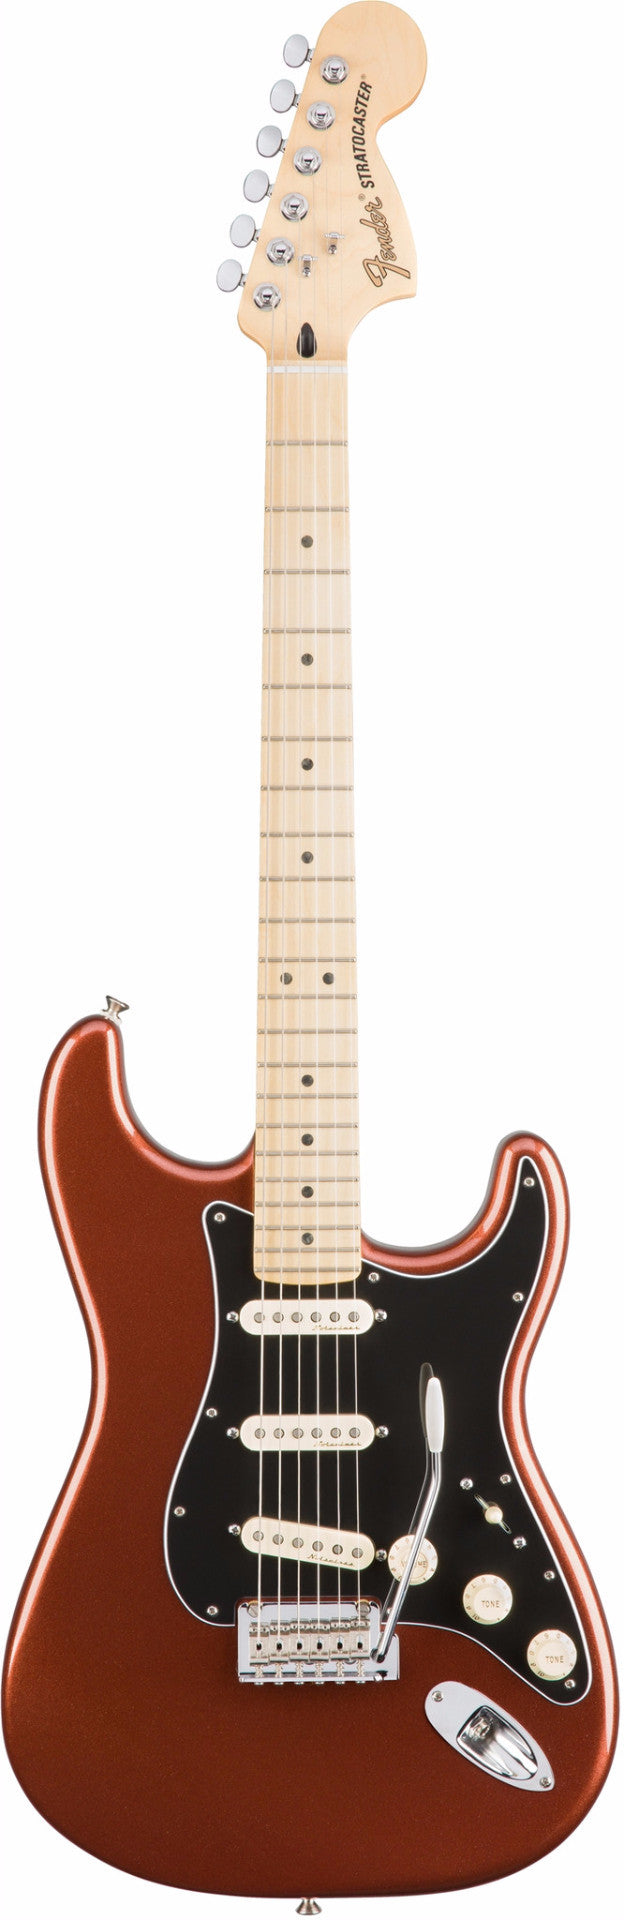 Fender Deluxe Roadhouse Stratocaster MN Classic Copper - Regent Sounds